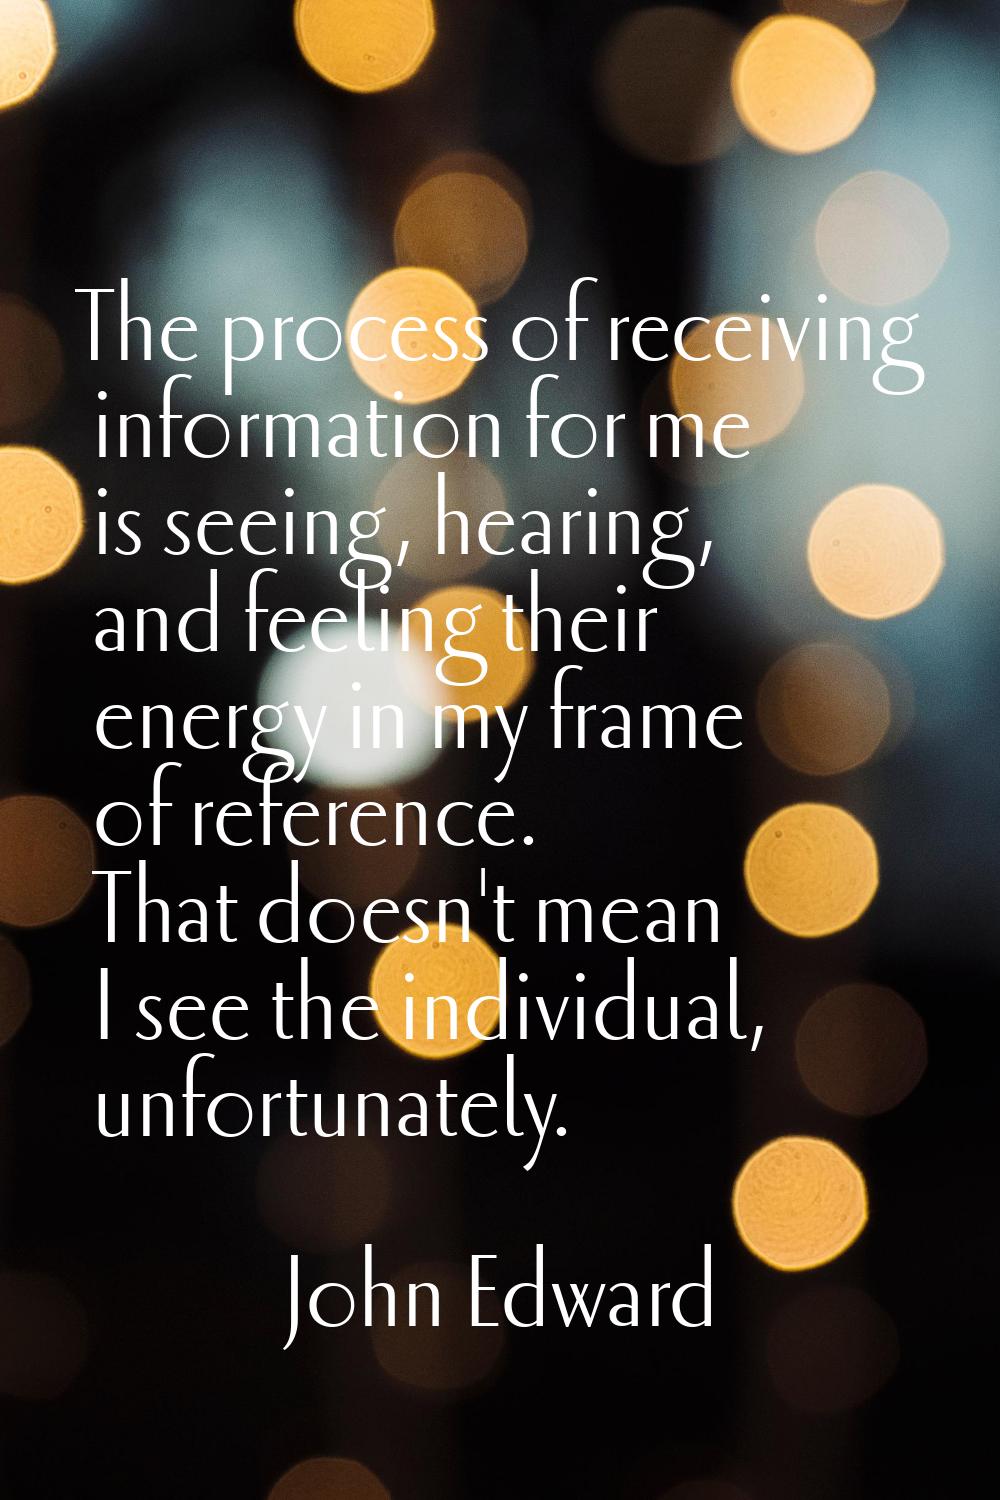 The process of receiving information for me is seeing, hearing, and feeling their energy in my fram